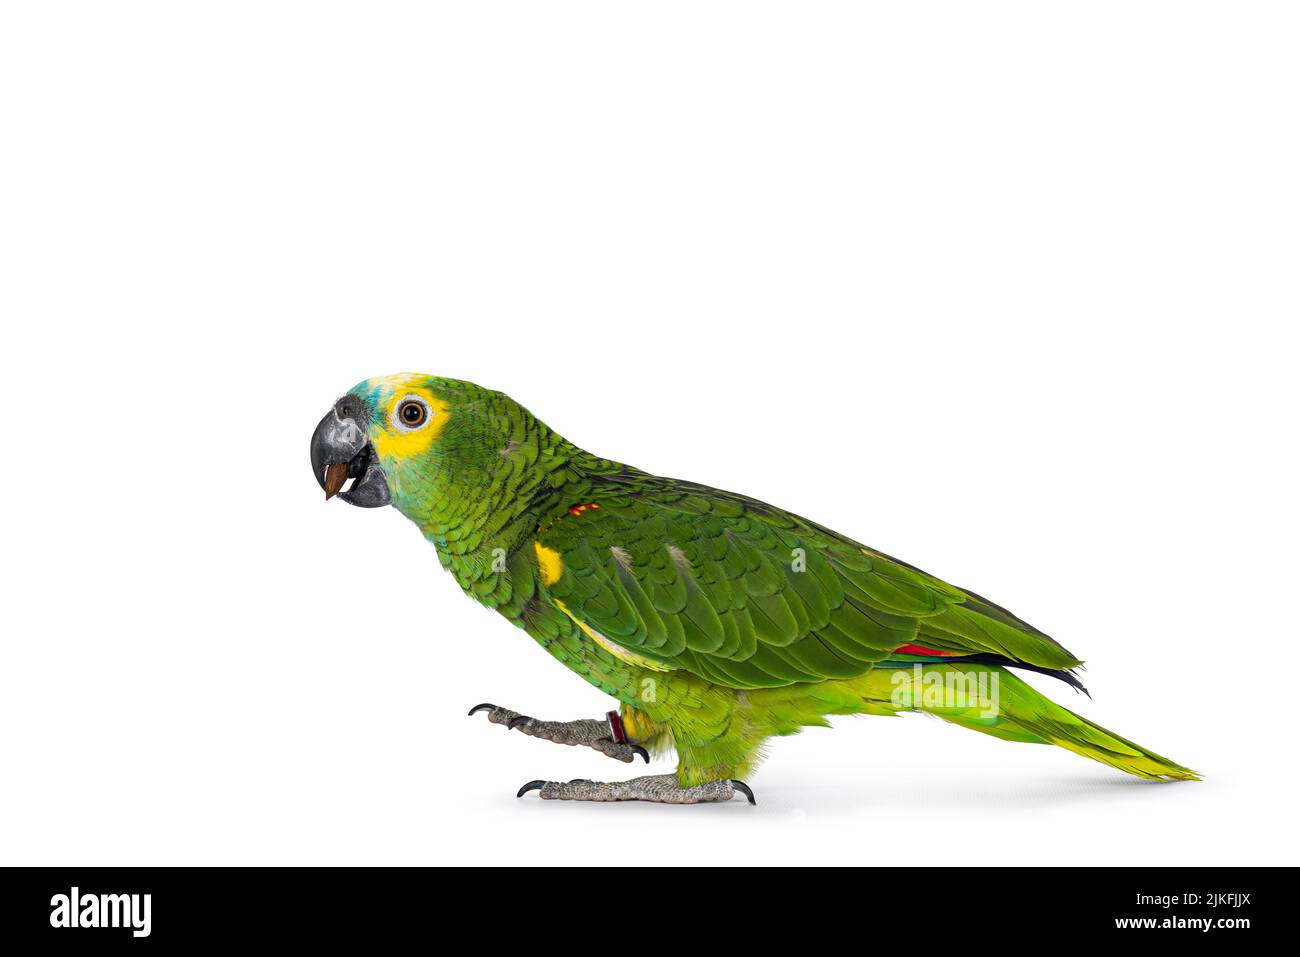 Blue or turquoise fronted Amazone parrot aka Amazona aestiva, walking side ways. Looking to the side showing profile. Isolated on a white background. Stock Photo